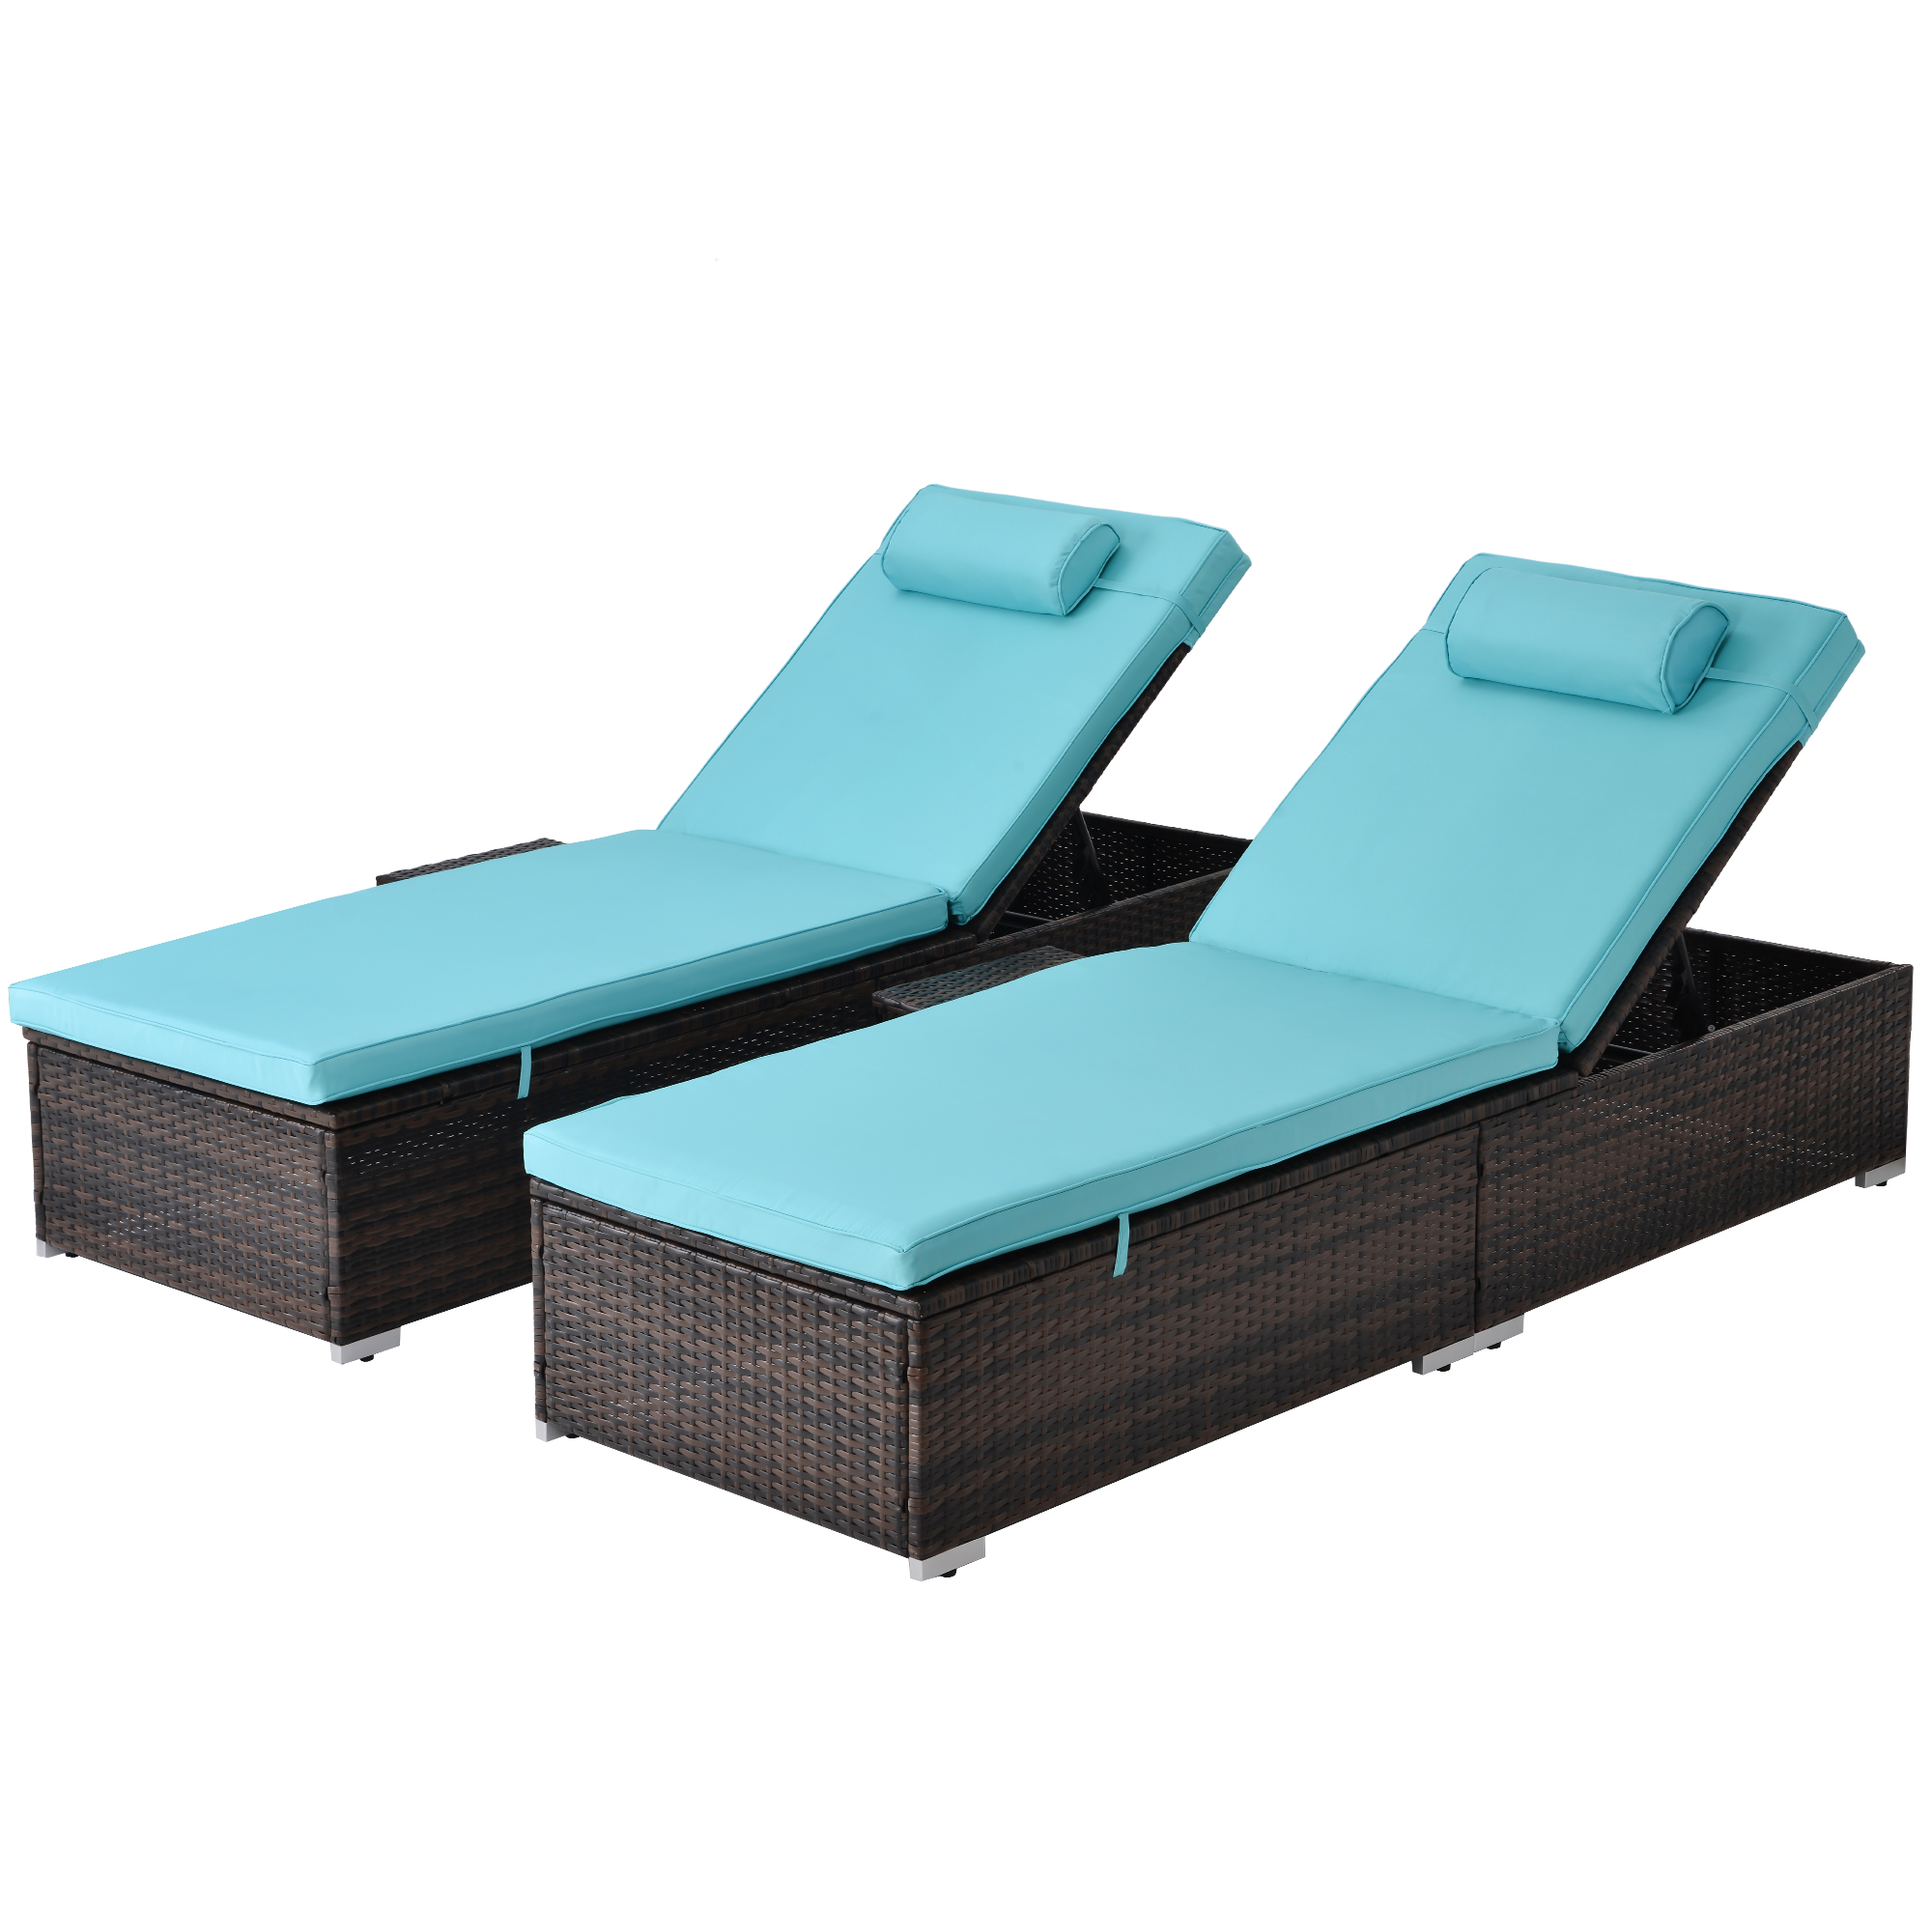 uhomepro 2-Piece Pool Chairs, Patio Chaise Loungers, Chaise Lounge Chair Outdoor Set Pool Furniture, Couch Cushioned Recliner Chair with Adjustable Back, Side Table, Head Pillow, Blue, Q18150 - image 2 of 13